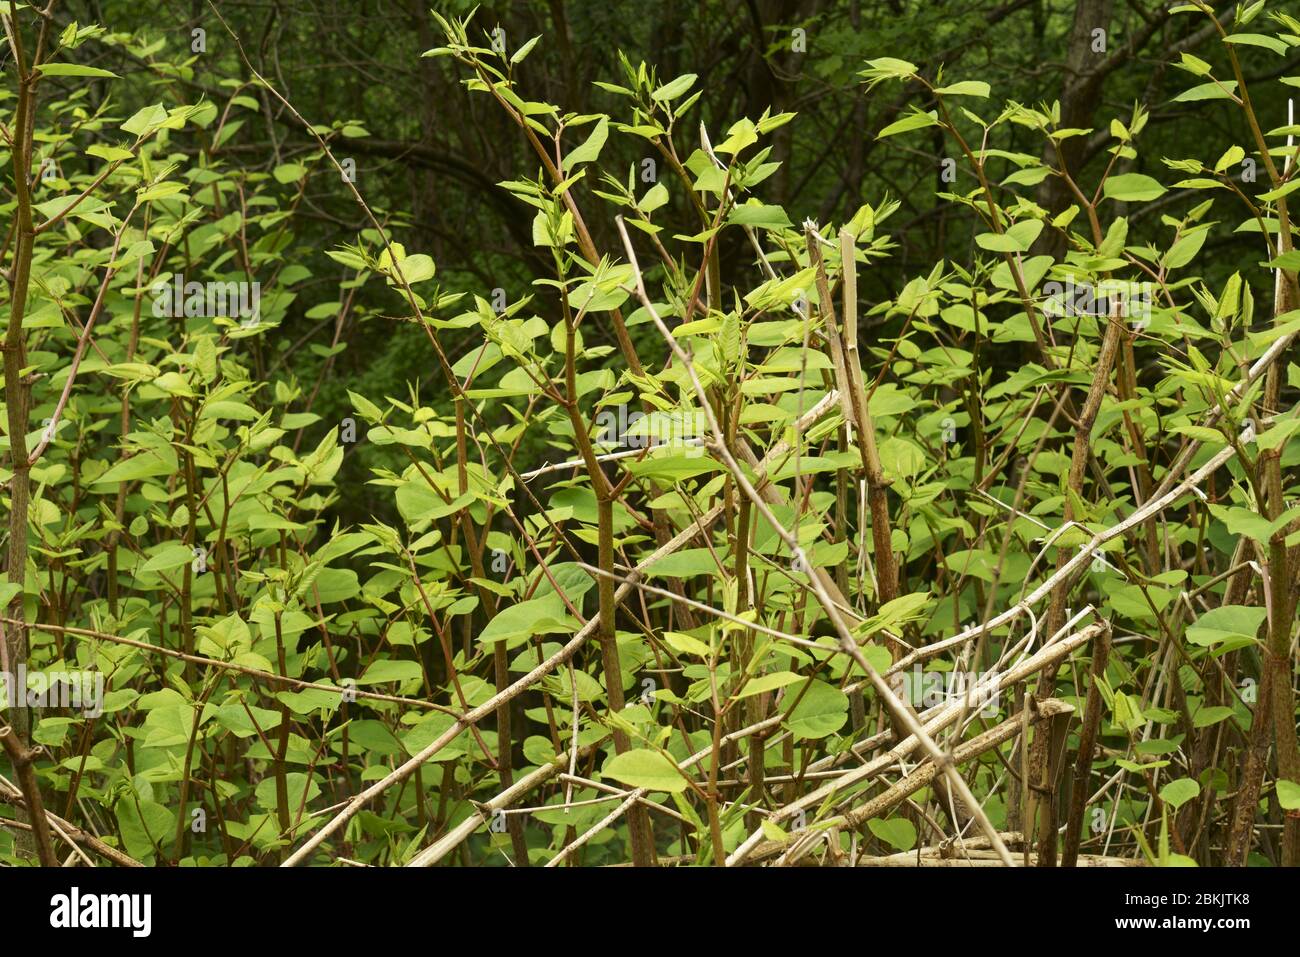 Japanese knotweed fallopia japonica growing in the UK. Stock Photo